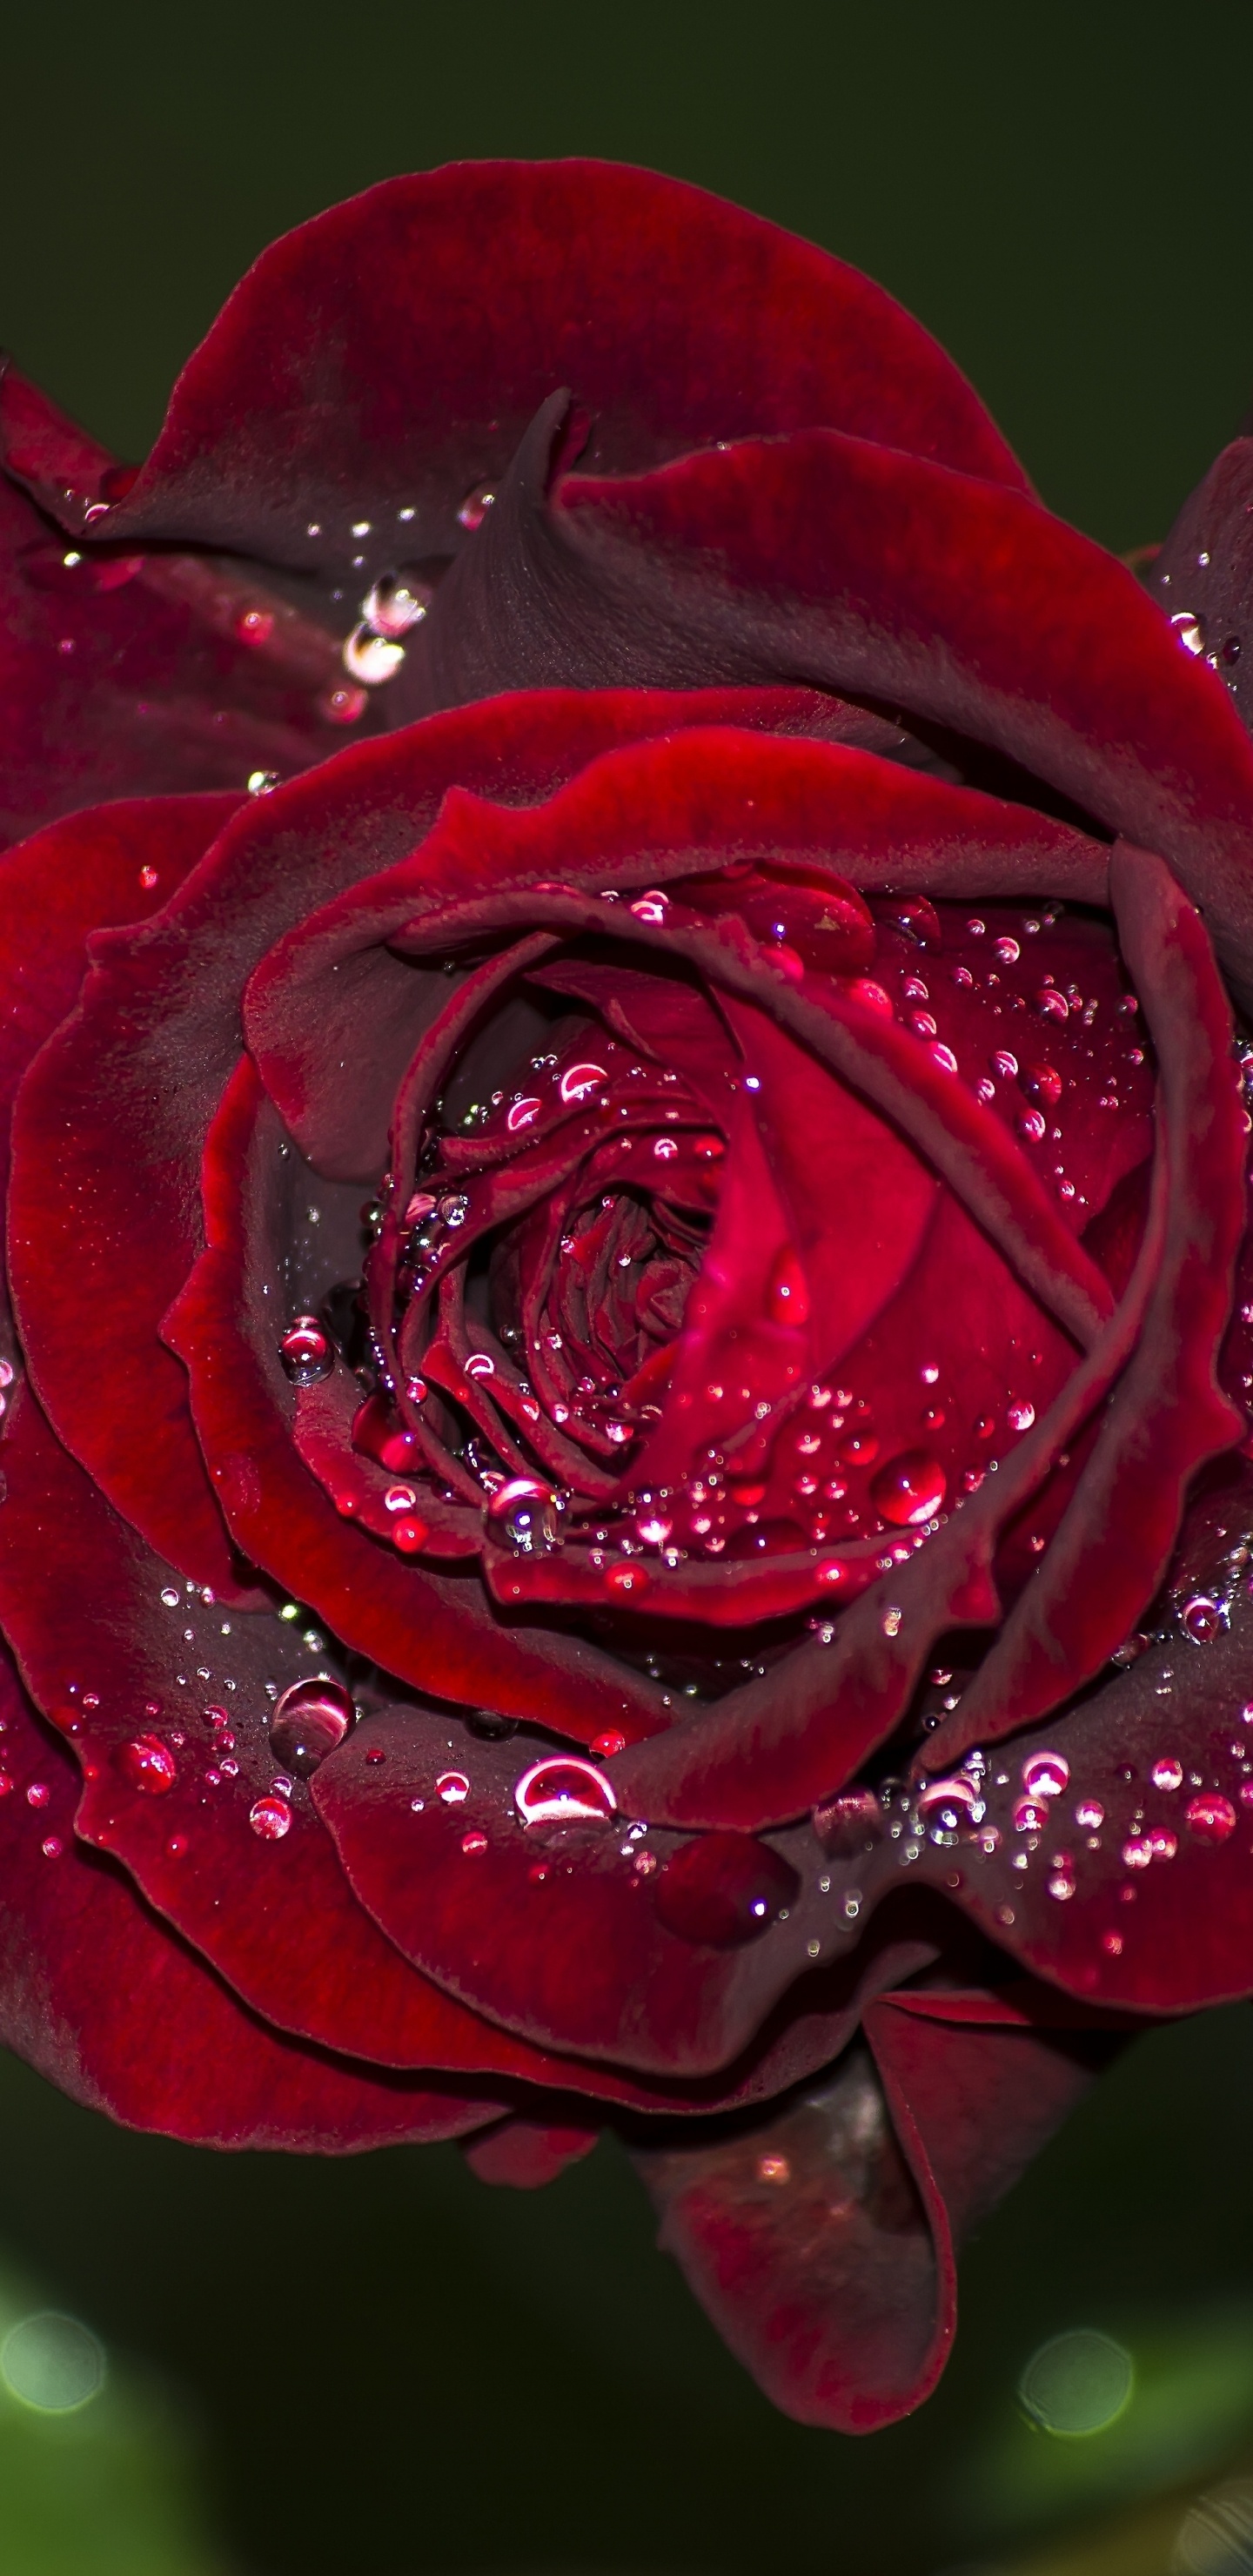 Red Rose in Bloom With Dew Drops. Wallpaper in 1440x2960 Resolution